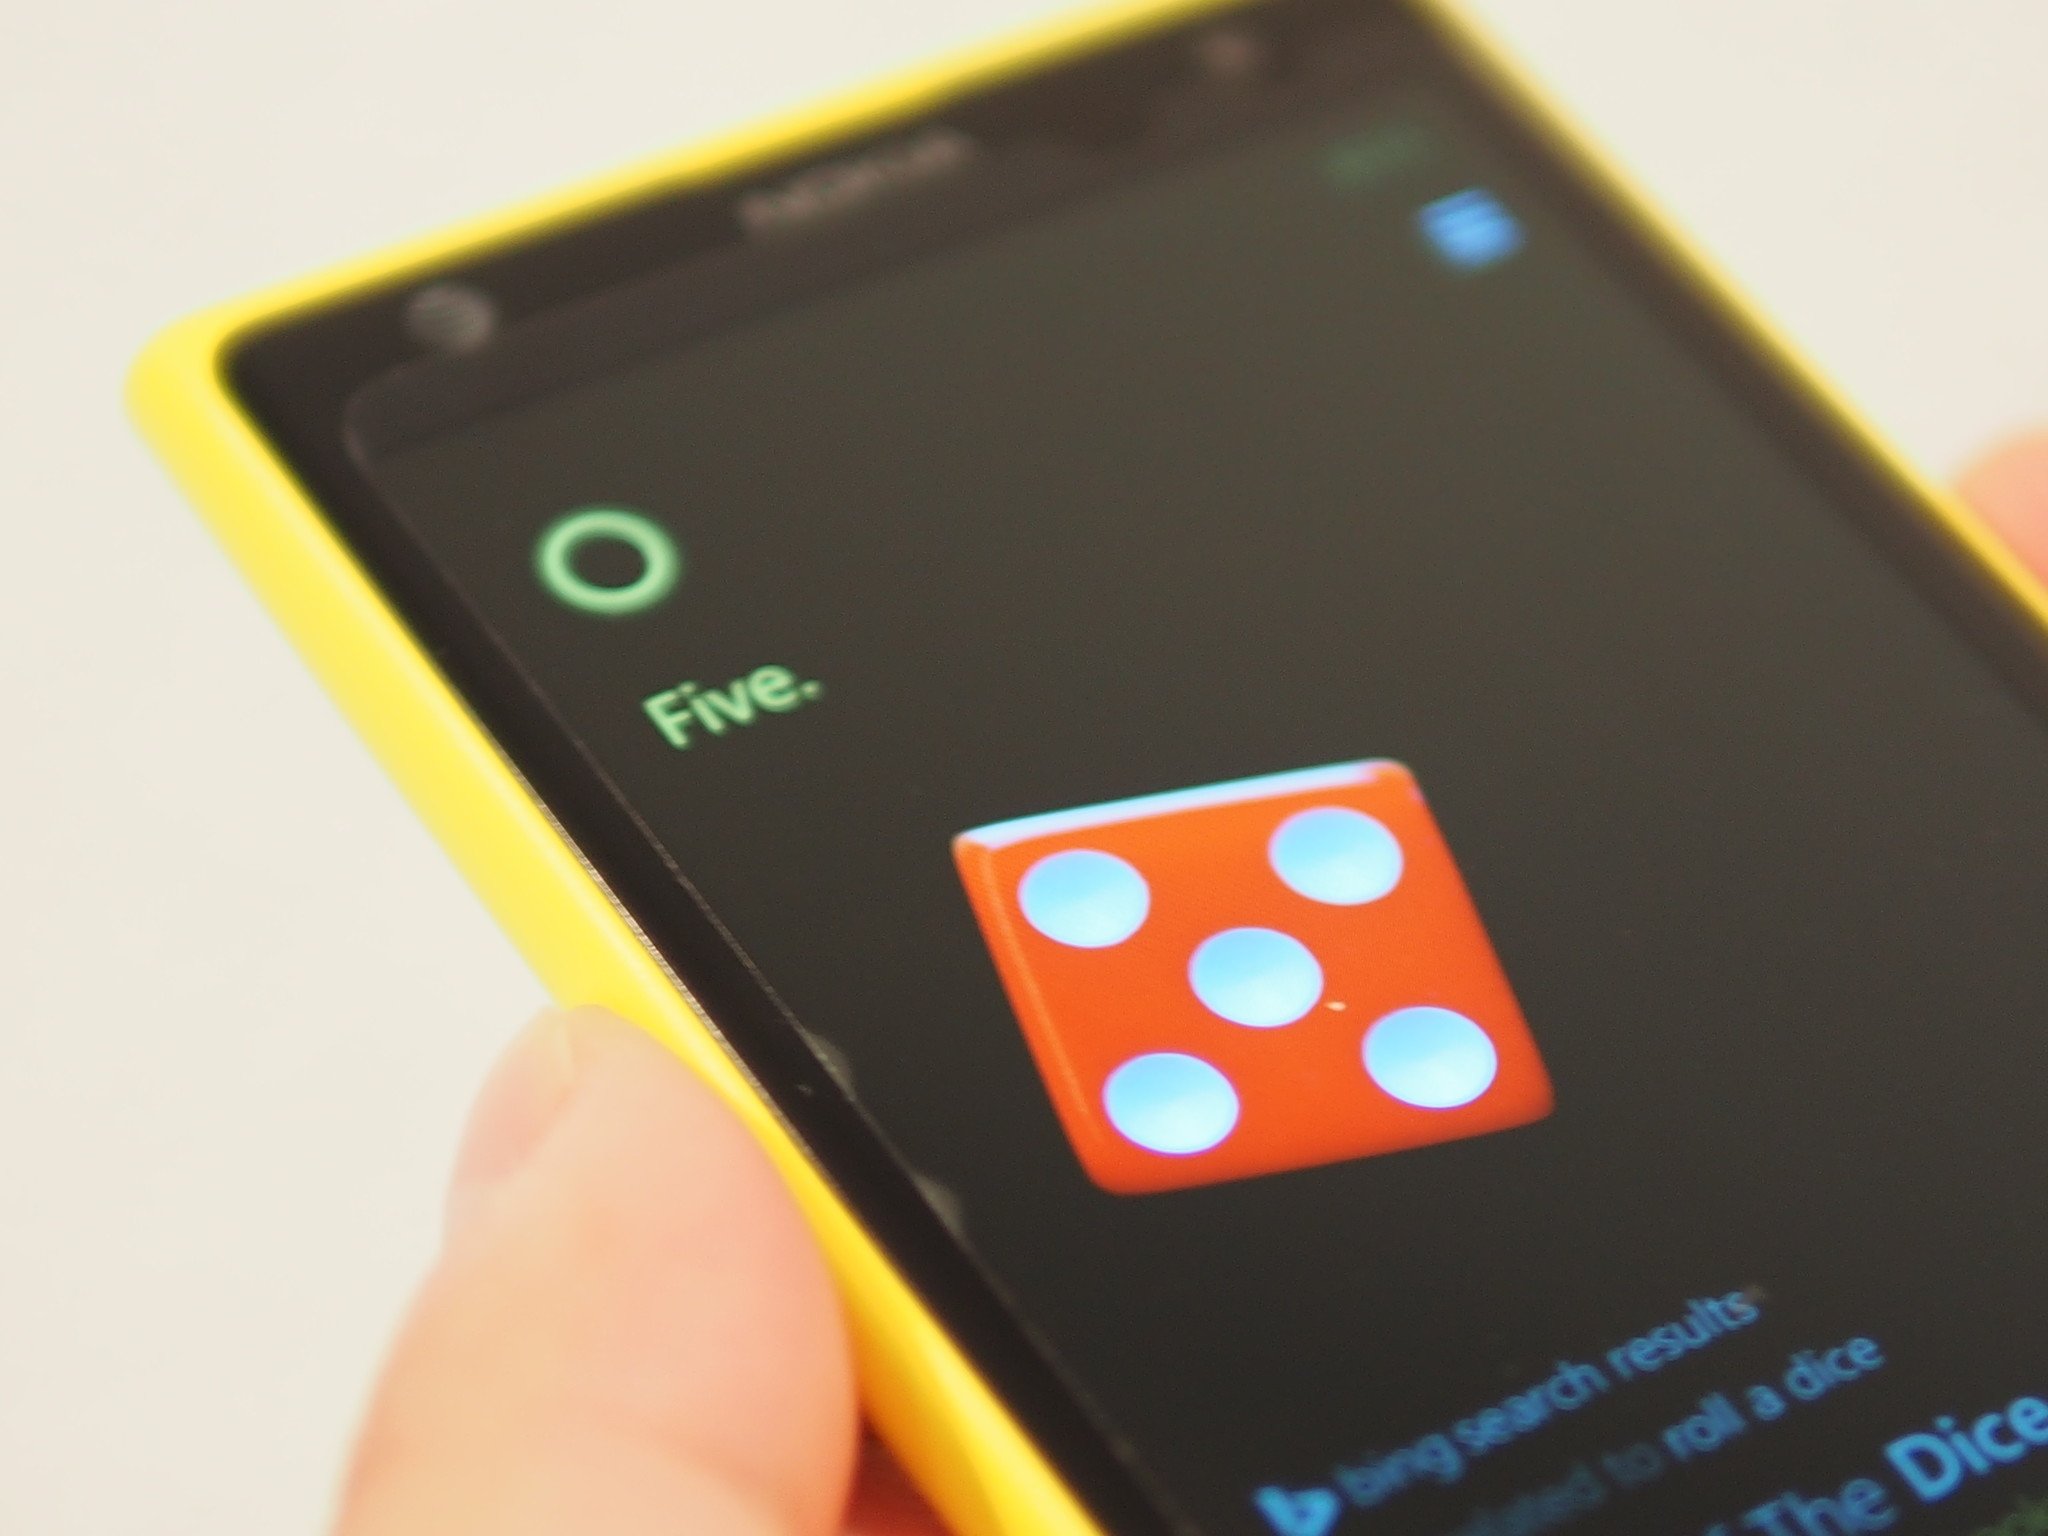 Cortana can help you settle decisions with a virtual coin toss or roll of the dice